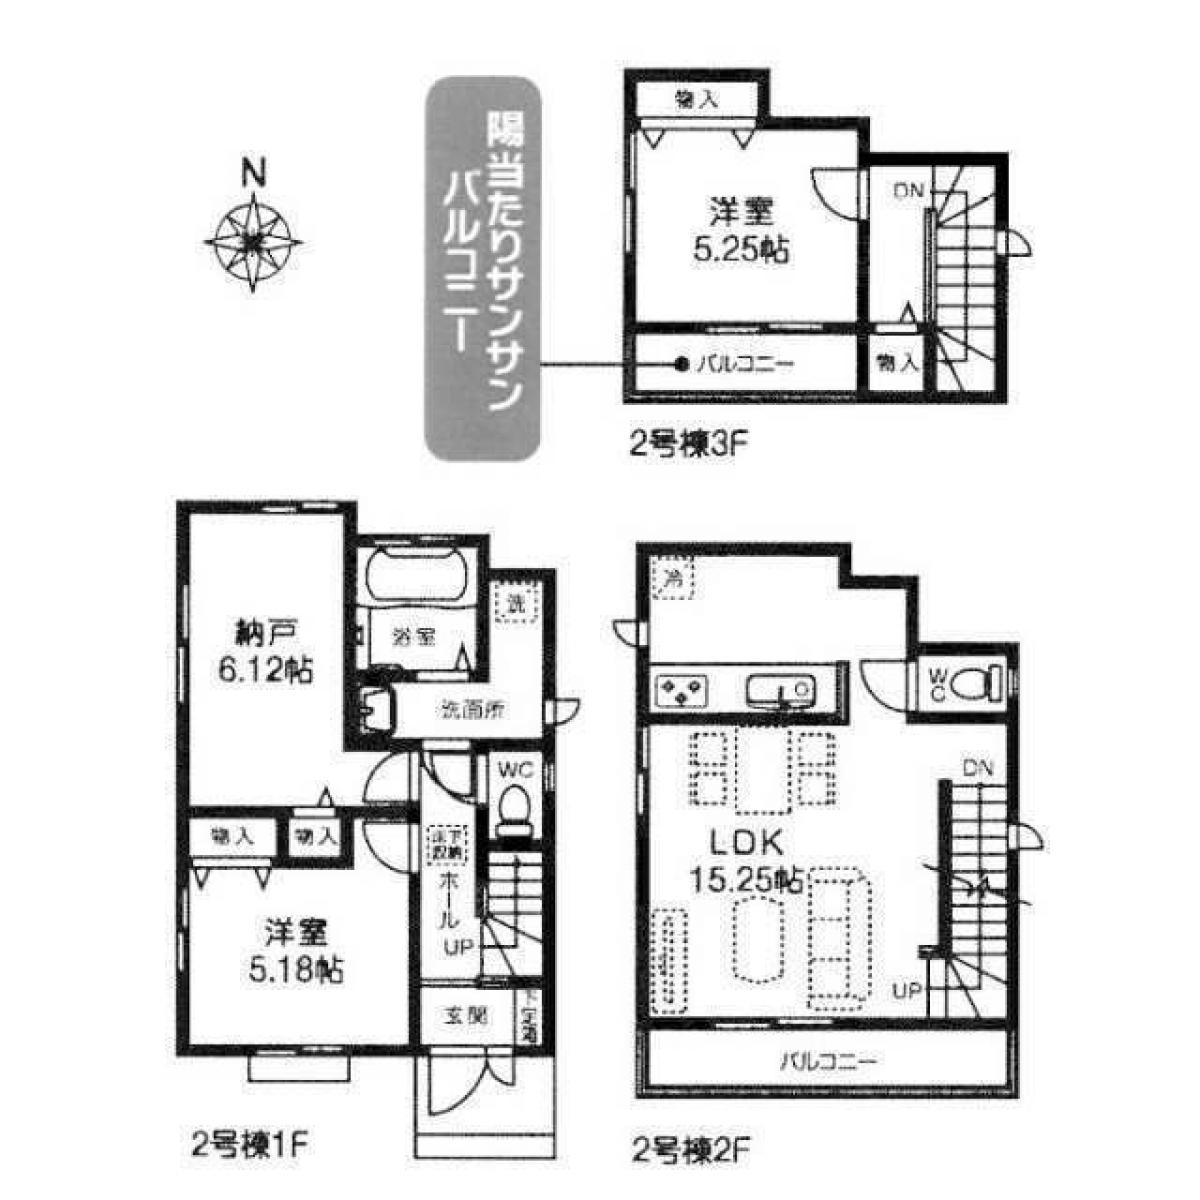 Picture of Home For Sale in Kita Ku, Tokyo, Japan